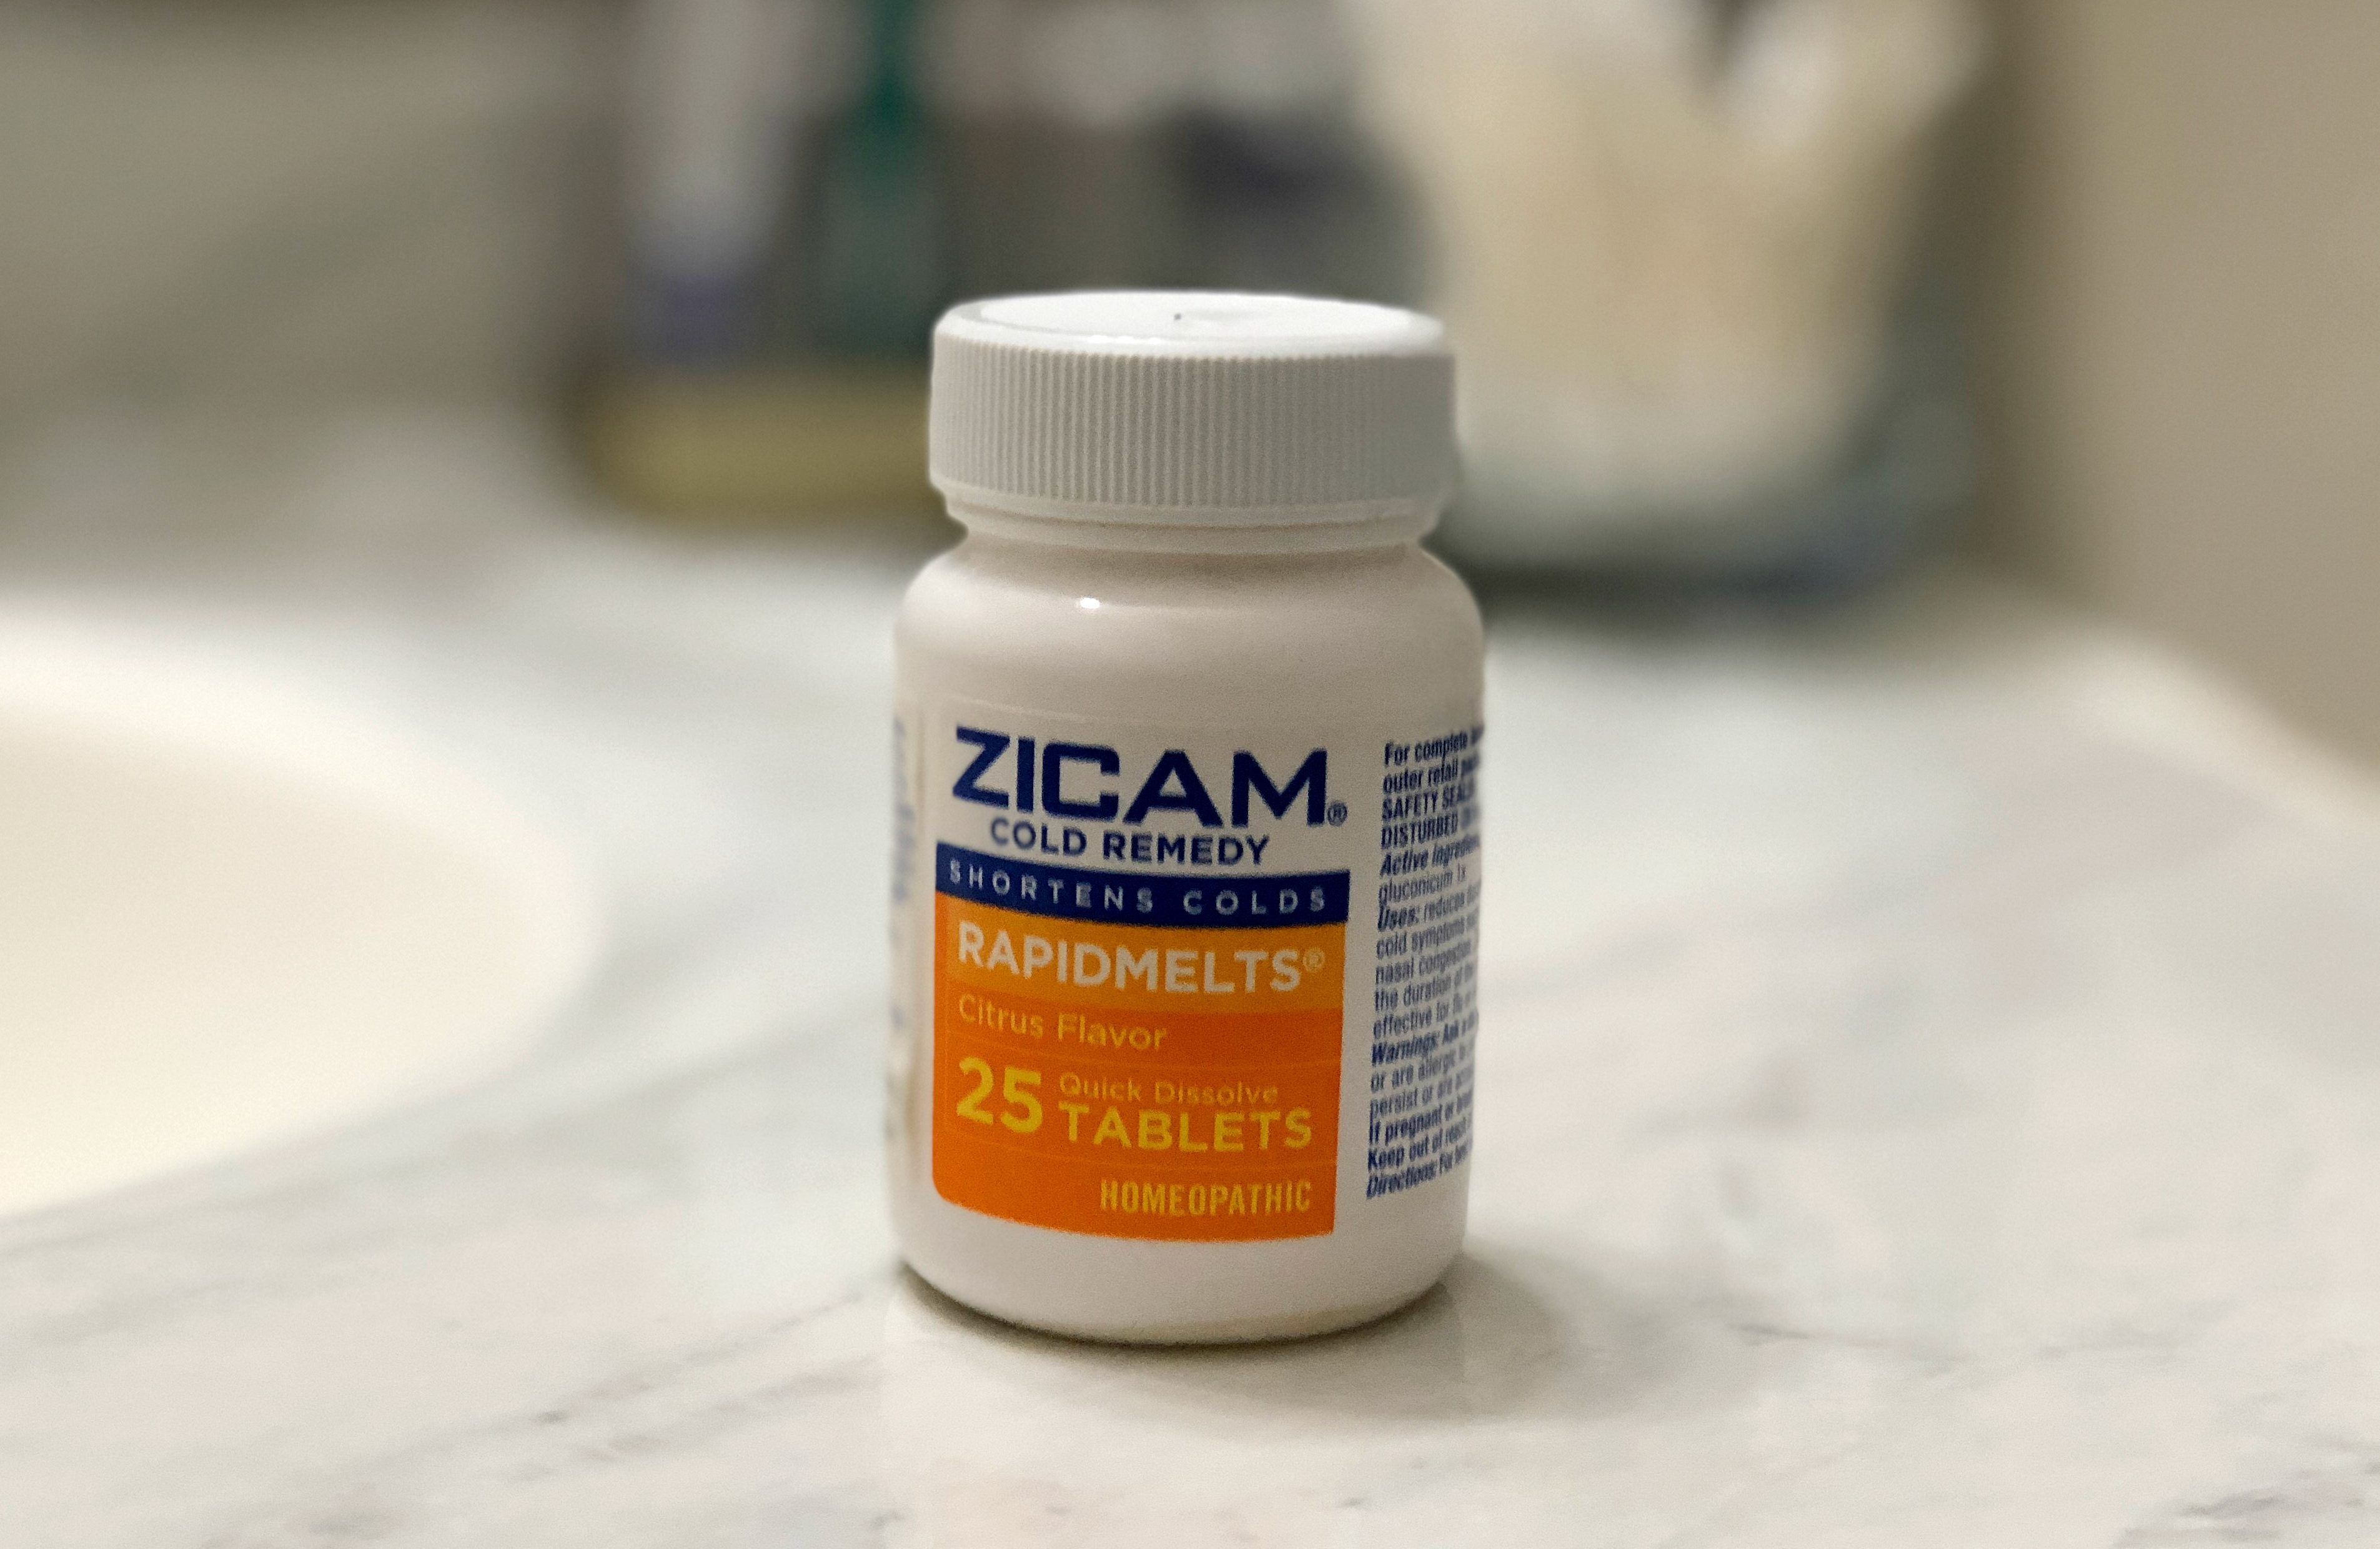 Can You Take Zicam While Pregnant? - A Comprehensive Guide